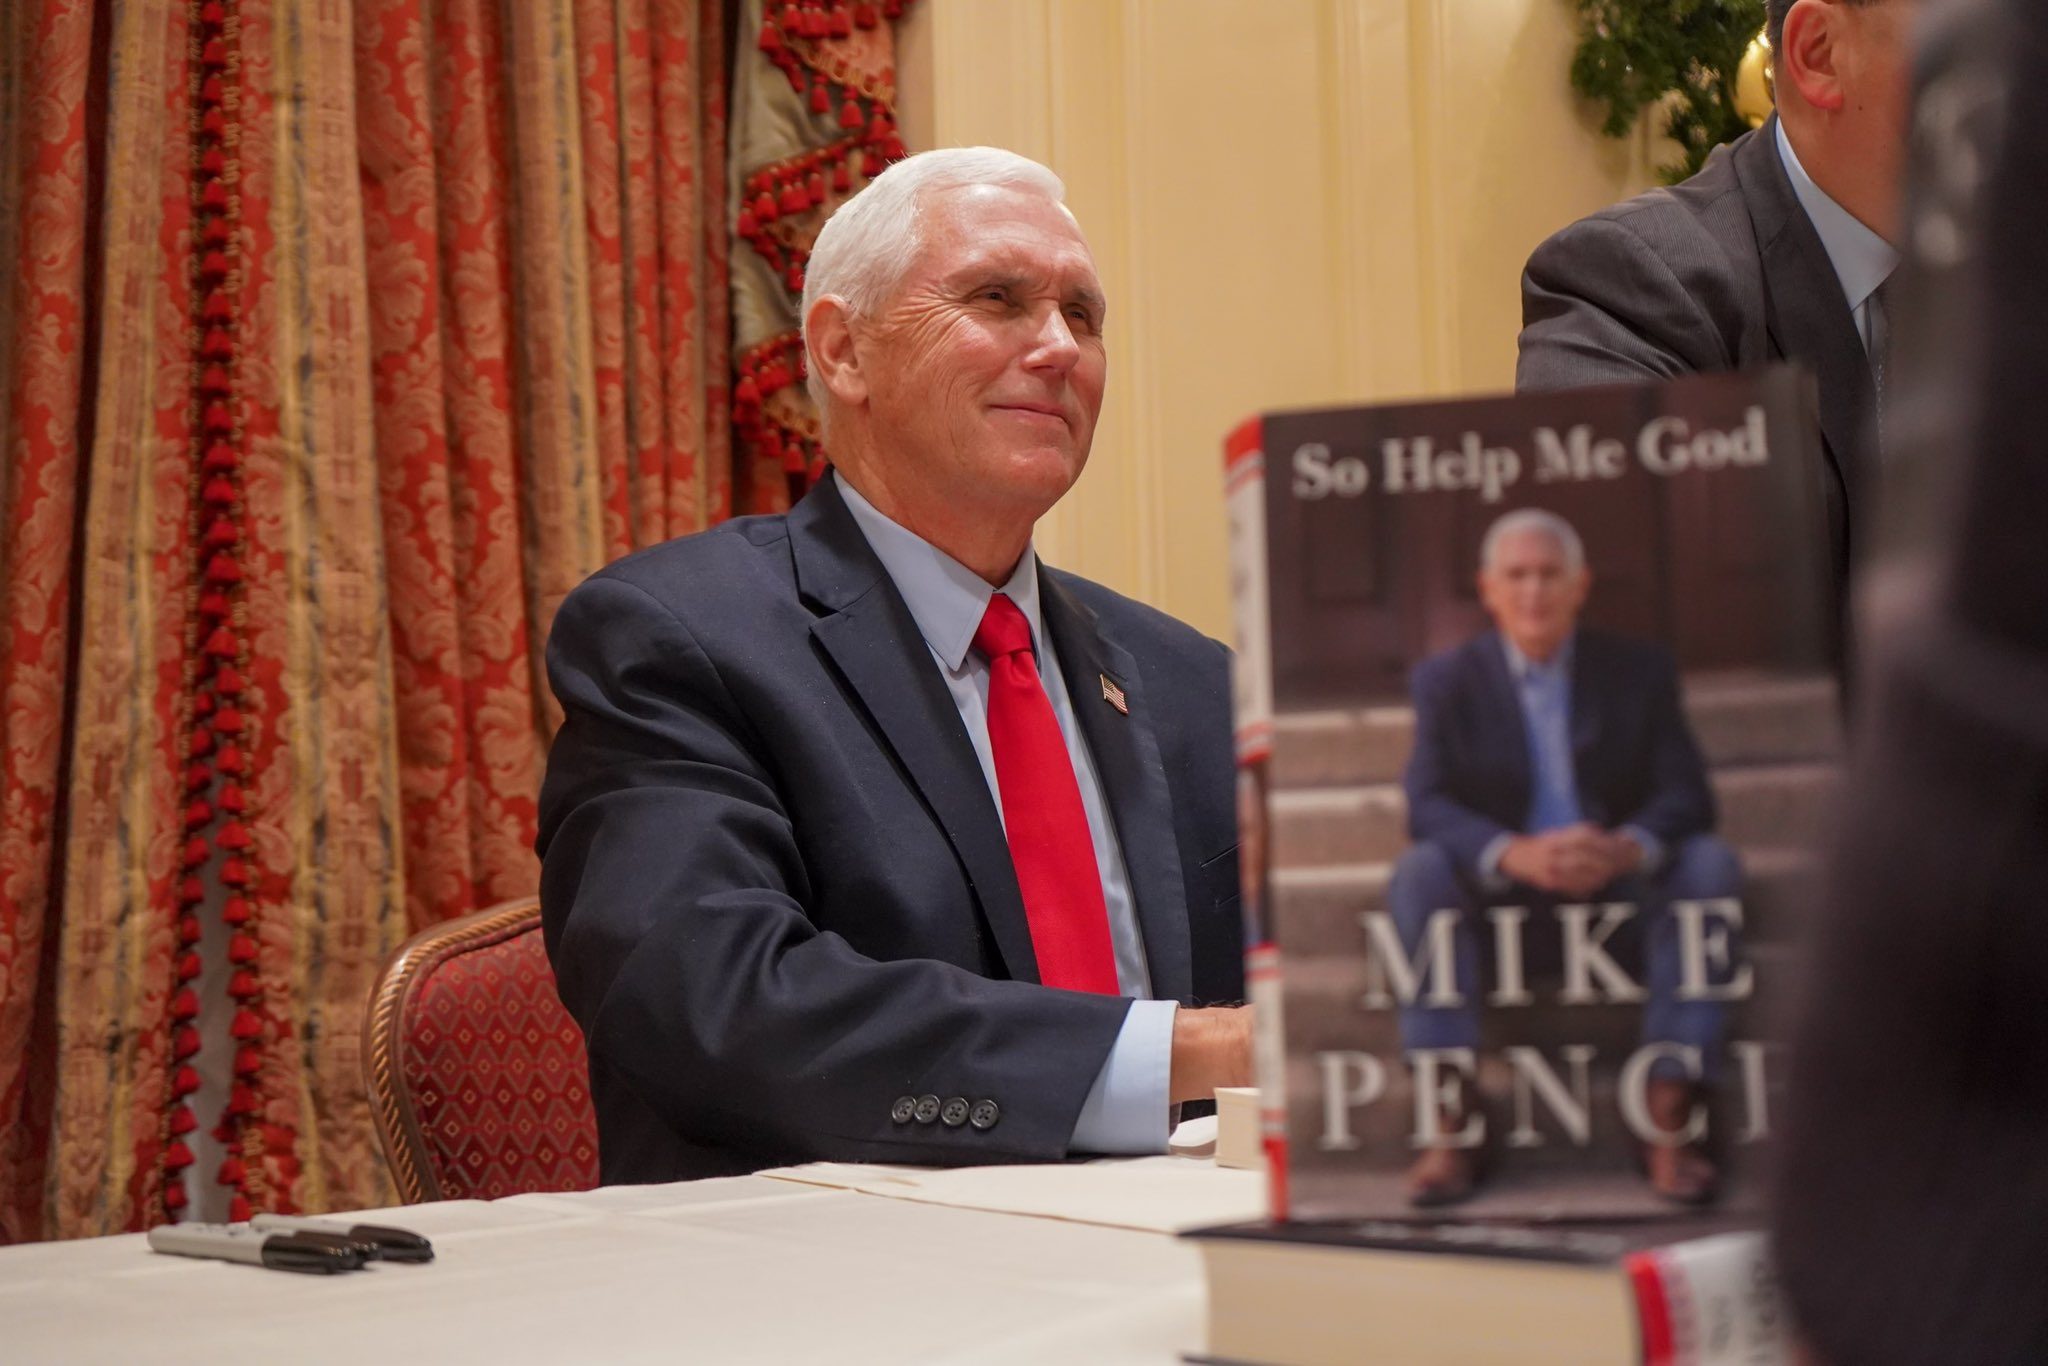 Mike Pence did not file to run for president, adviser says